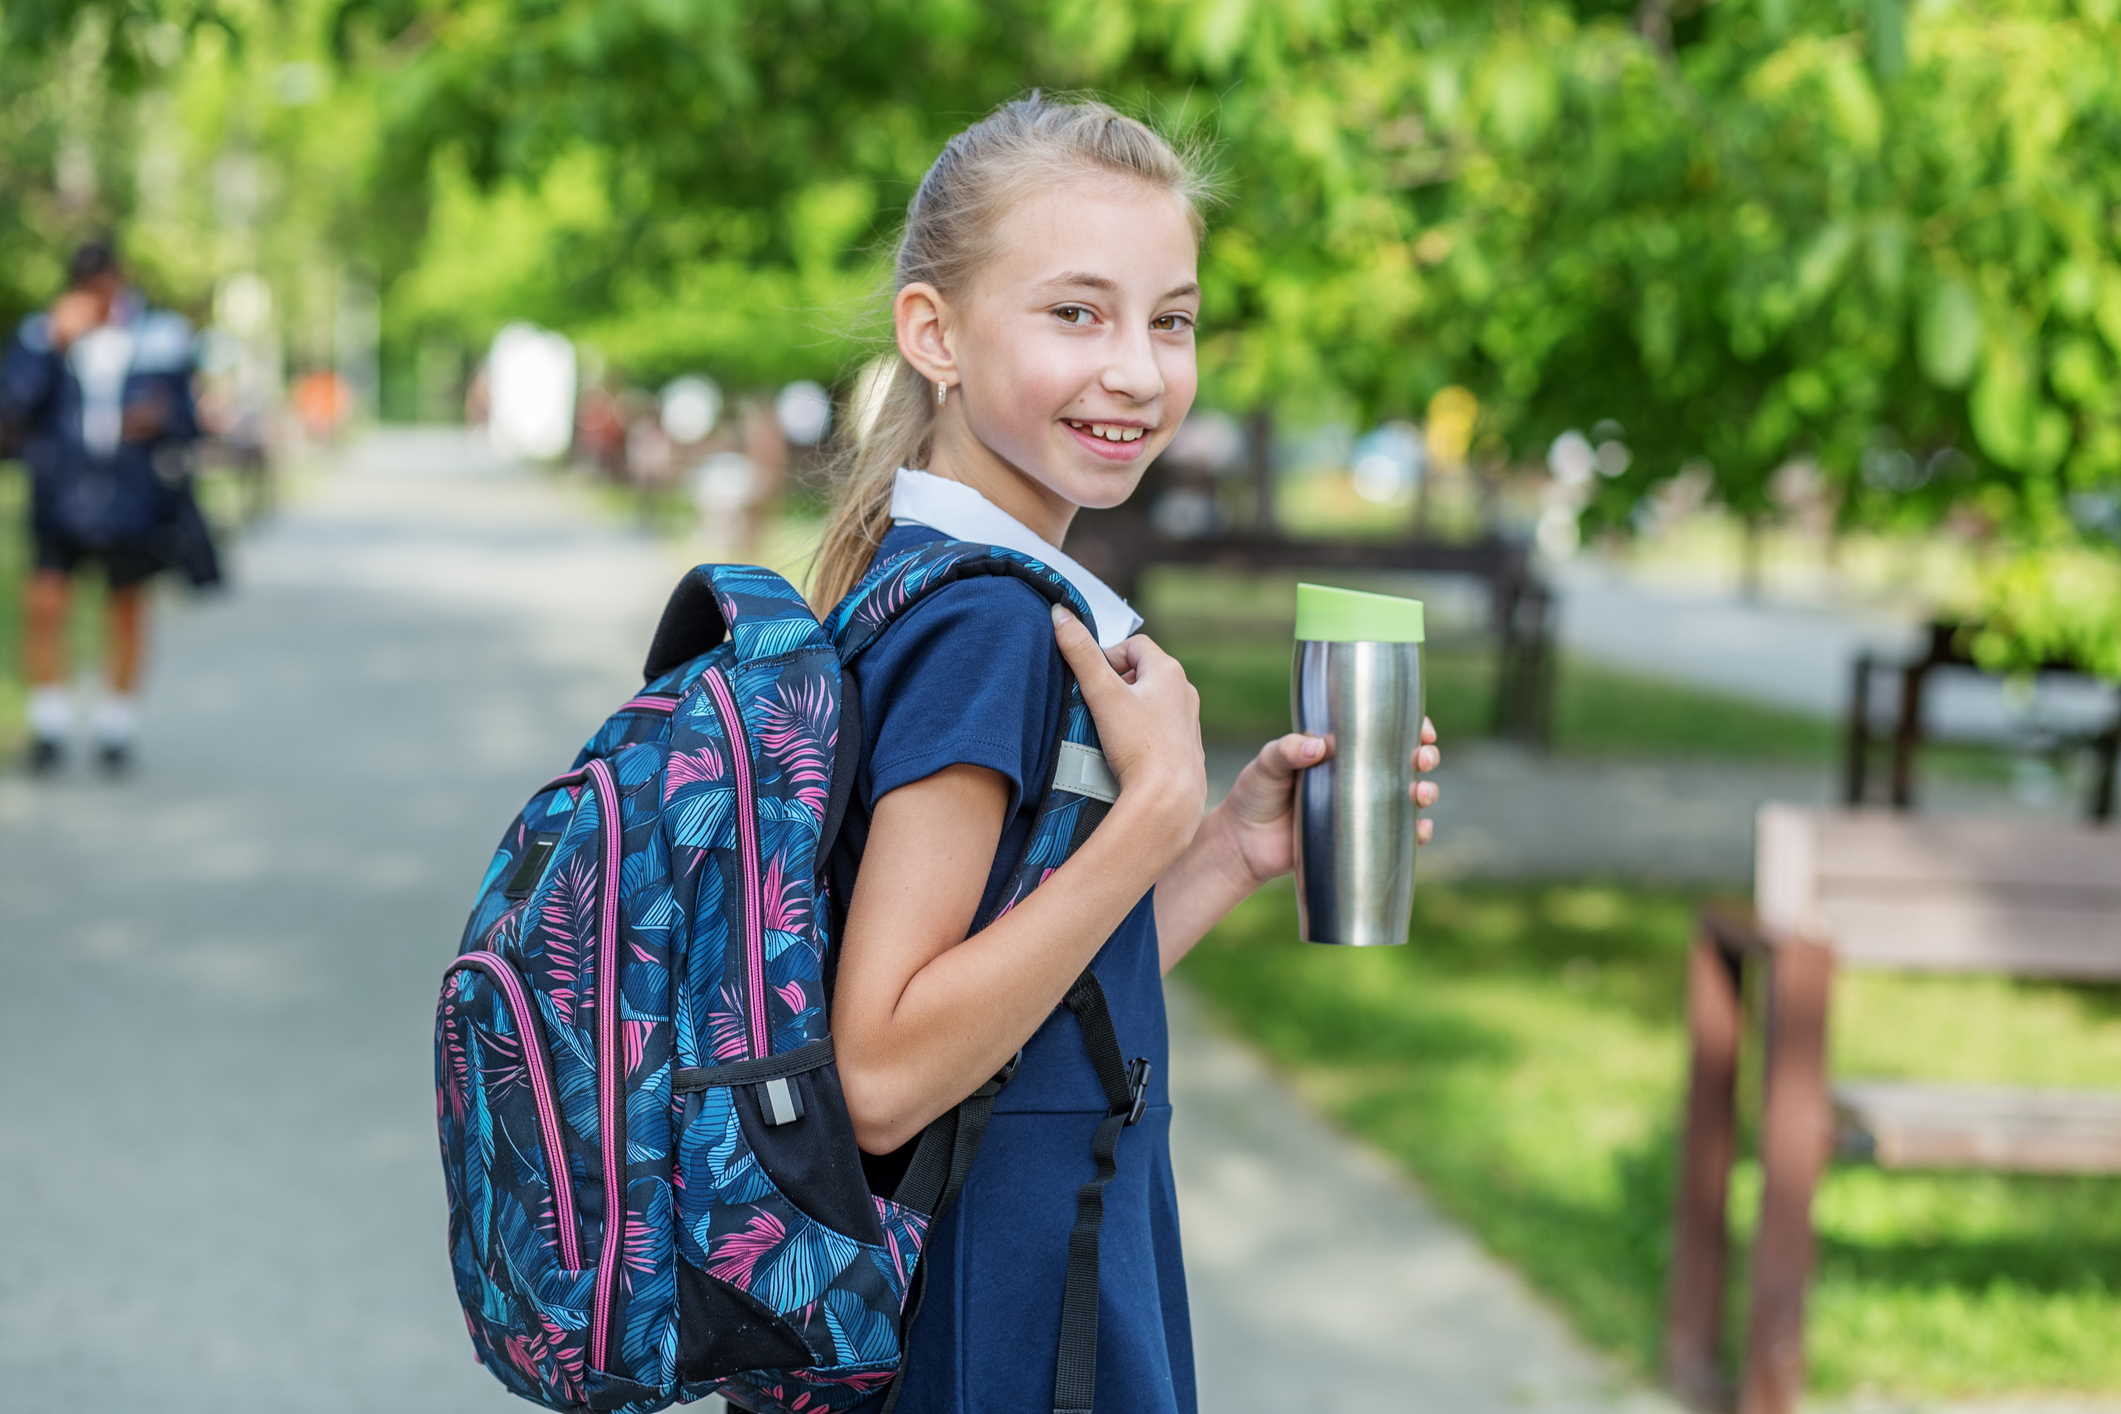 Girl with backpack smiling at camera, holding a thermos, standing on a school path